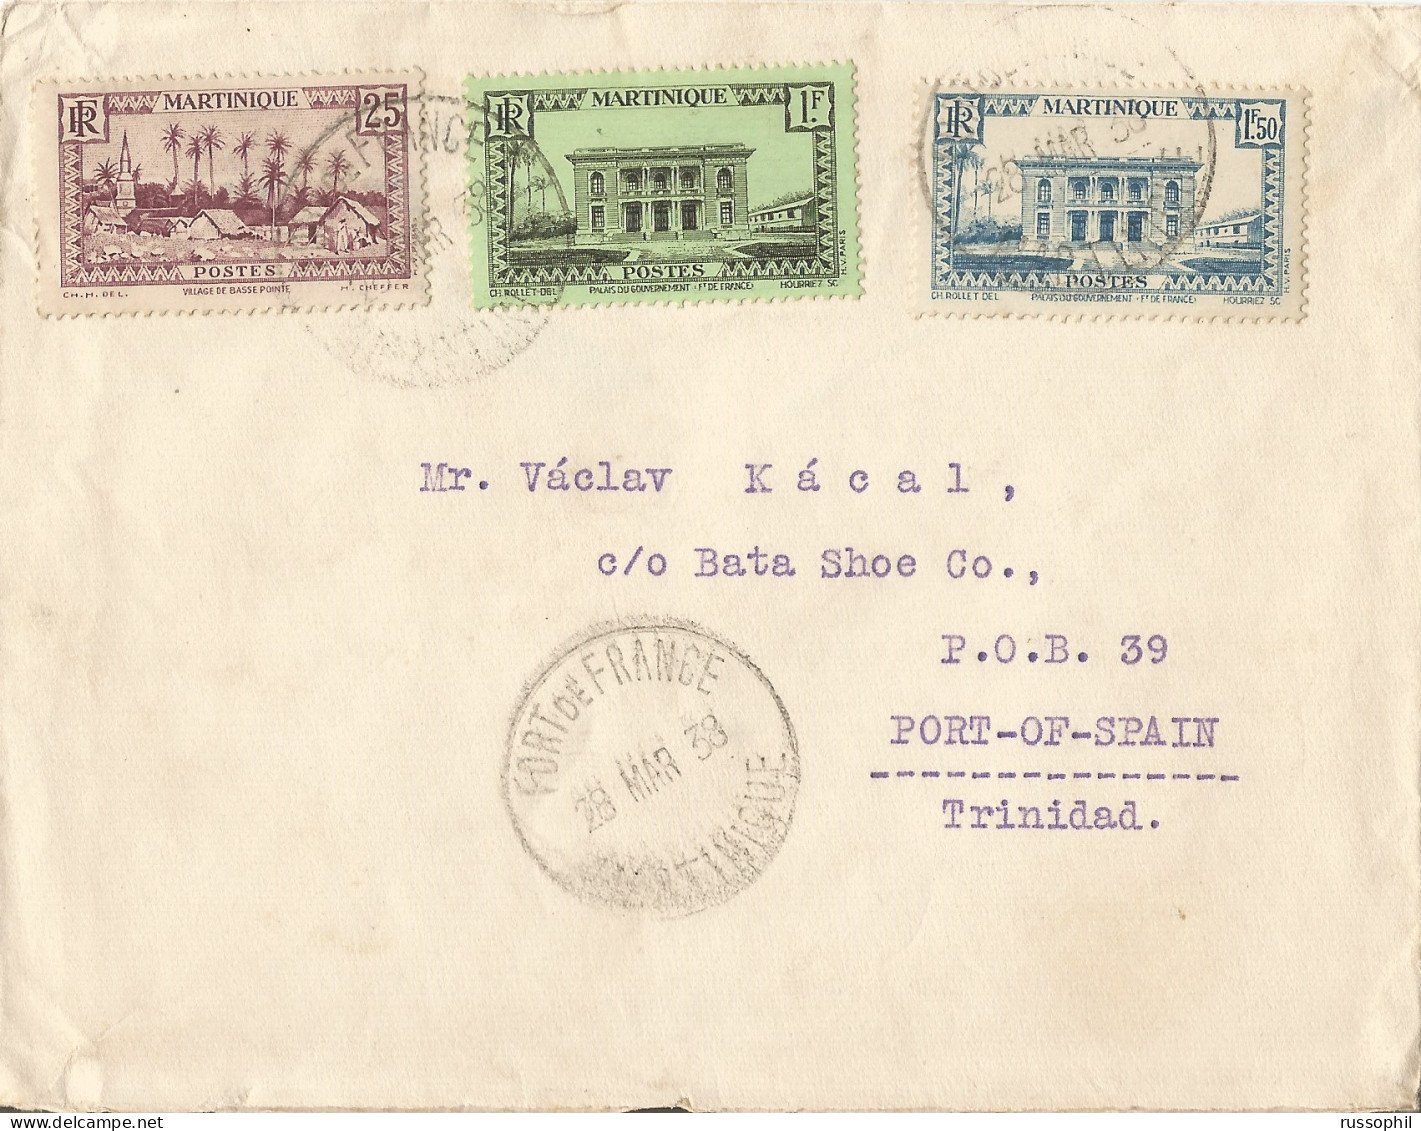 MARTINIQUE - 2 FR.  75 CENT. FRANKING ON COVER FROM FORT DE FRANCE TO TRINIDAD - BATA SHOES - 1938 - Lettres & Documents